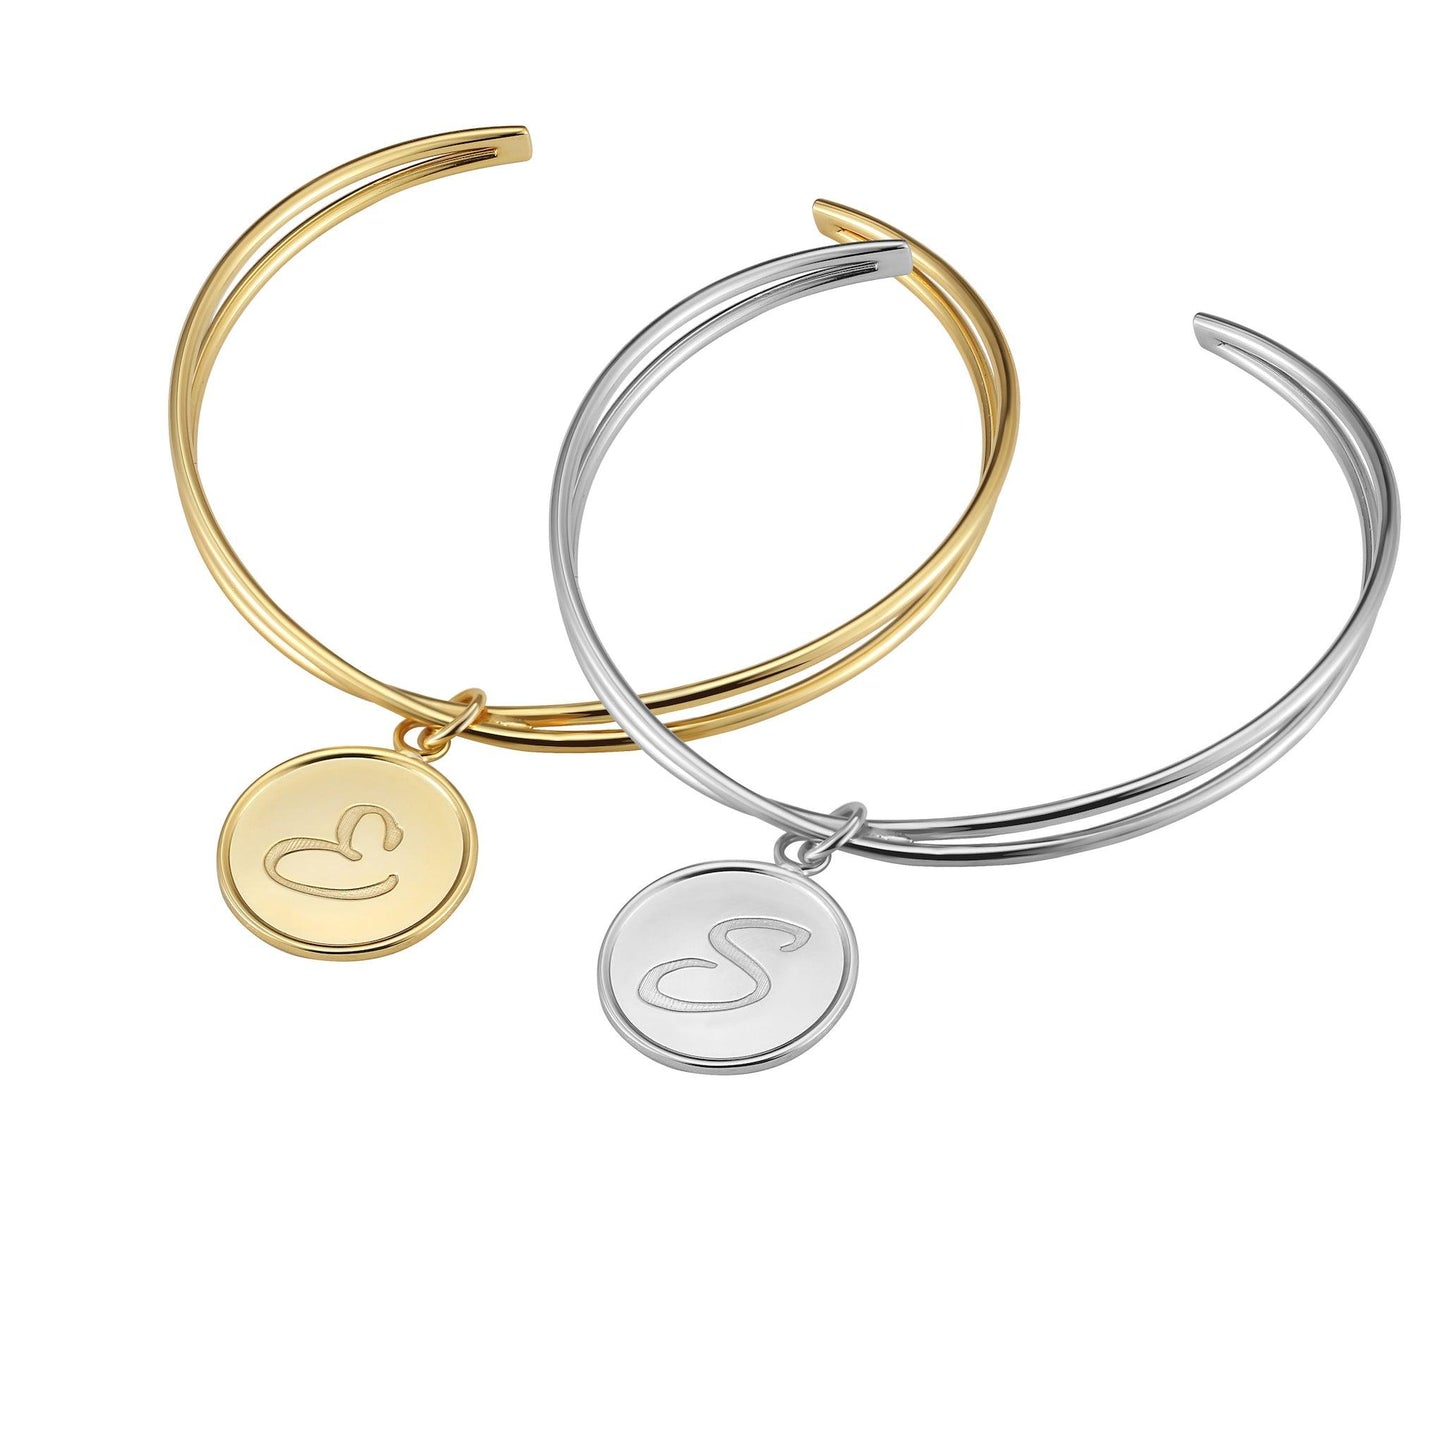 Infinity Initial Bracelet in sterling silver. Available in silver and gold finishes.